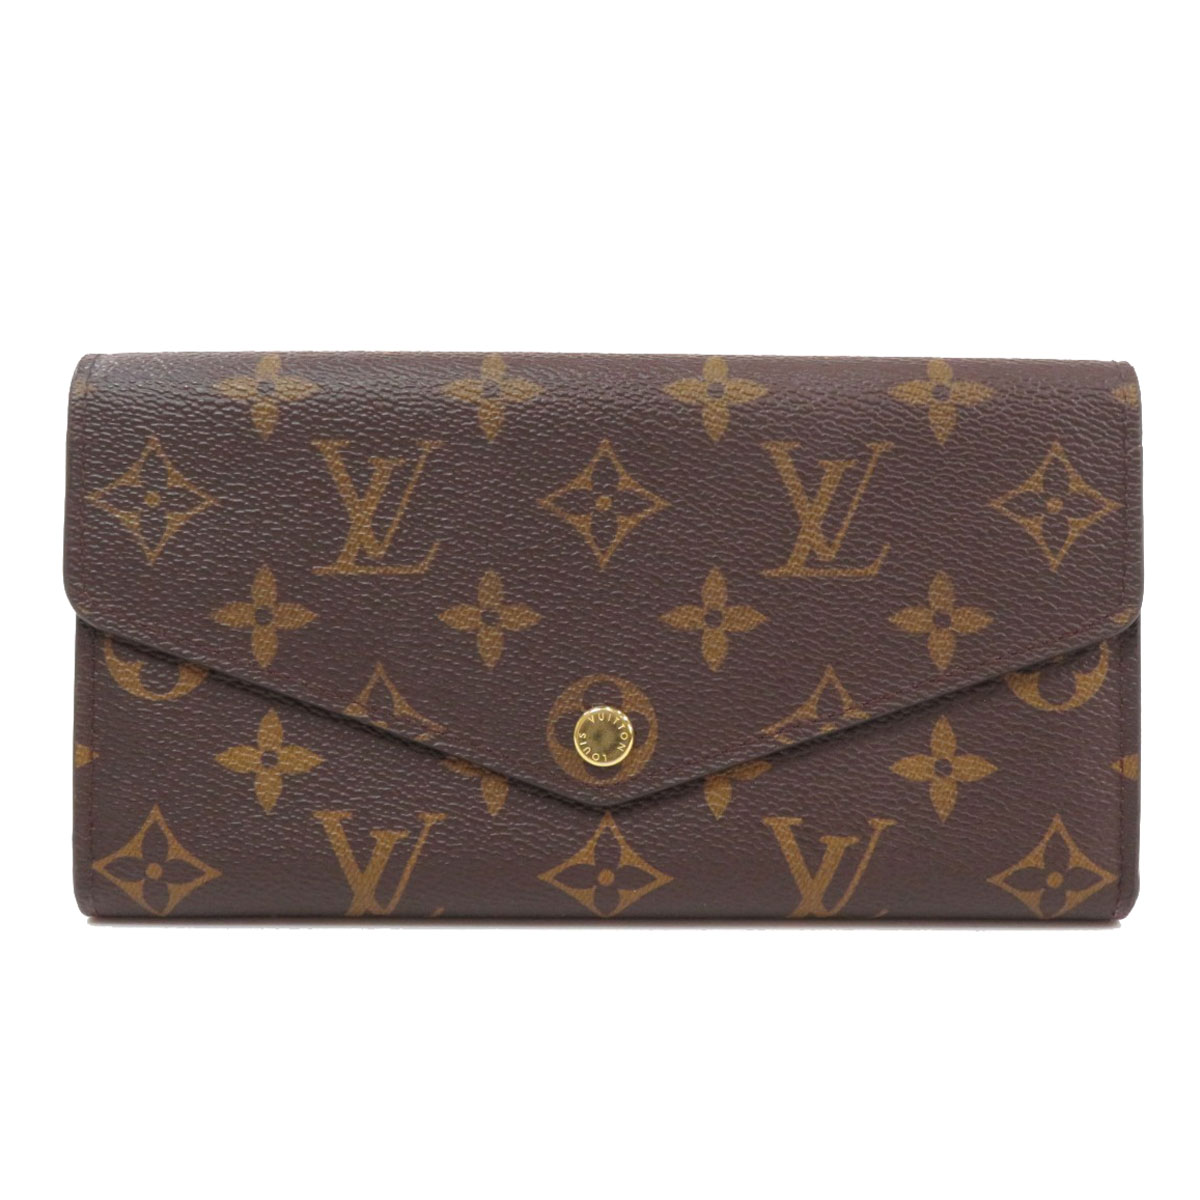 LOUIS VUITTON M60531 Long wallet (with Coin Pocket) Portefeiulle Sarah ...